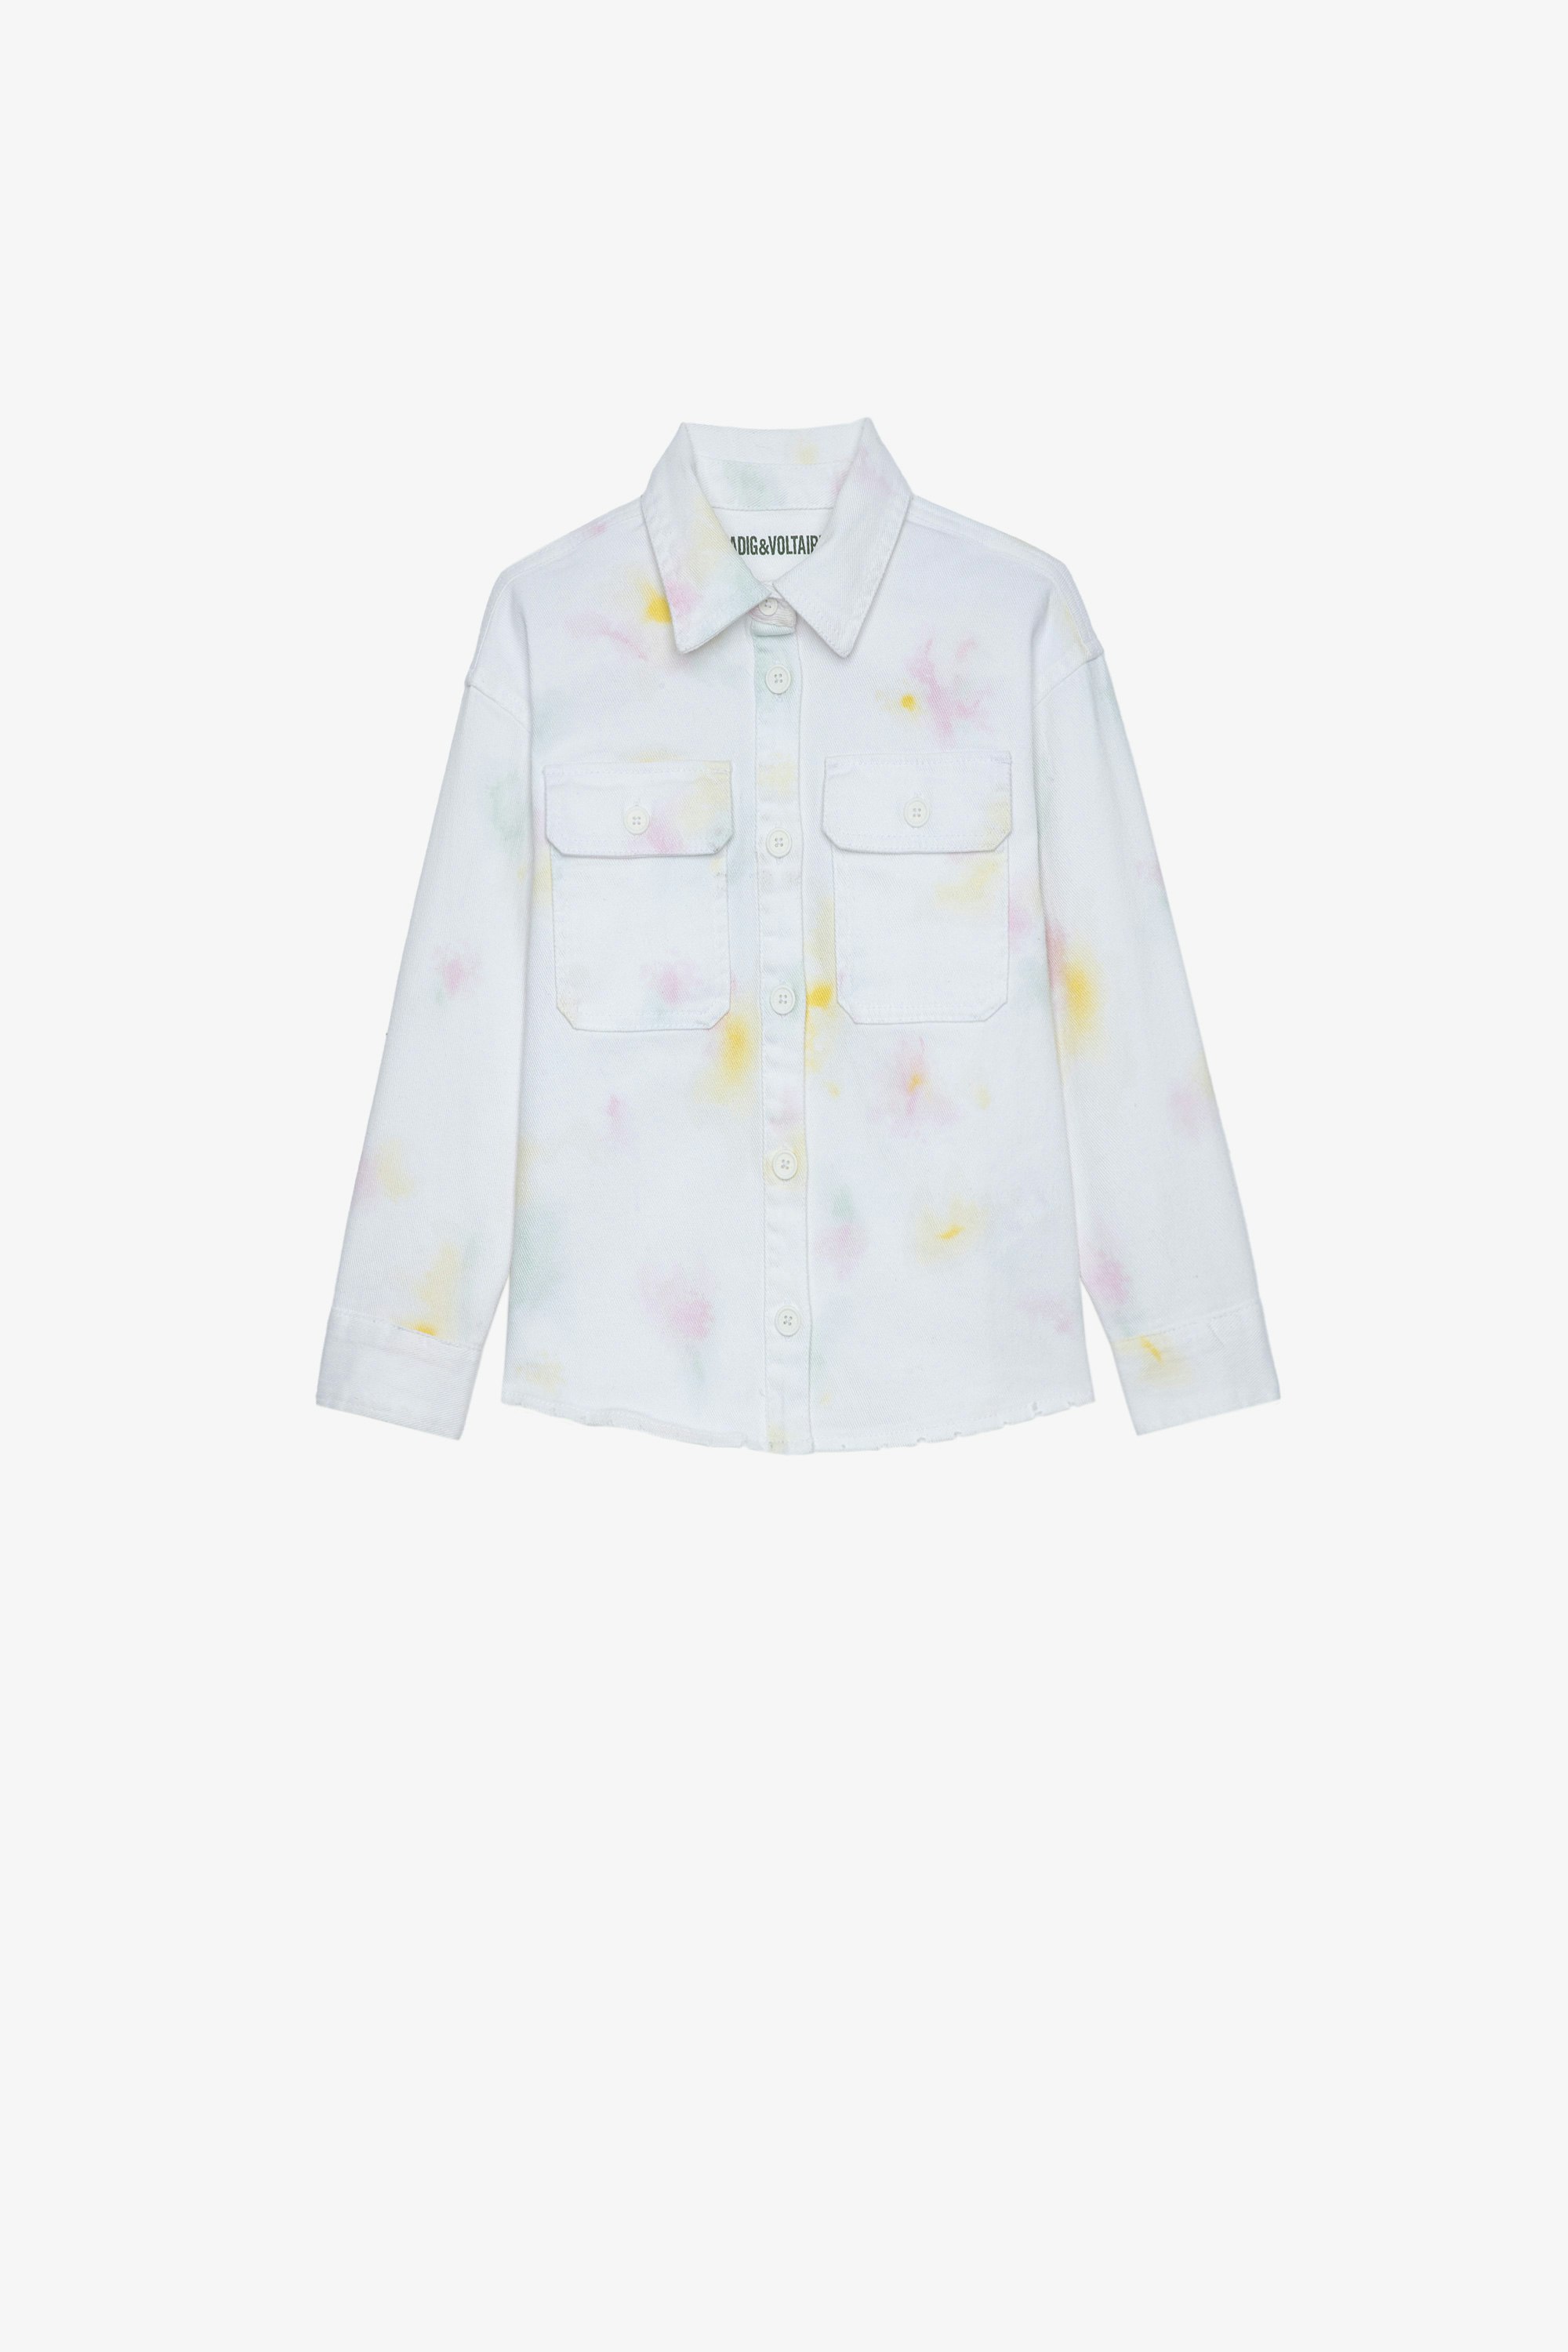 Bonnie Kids' Jacket Kids’ white cotton jacket with tie-dye print and ZV signature on the back